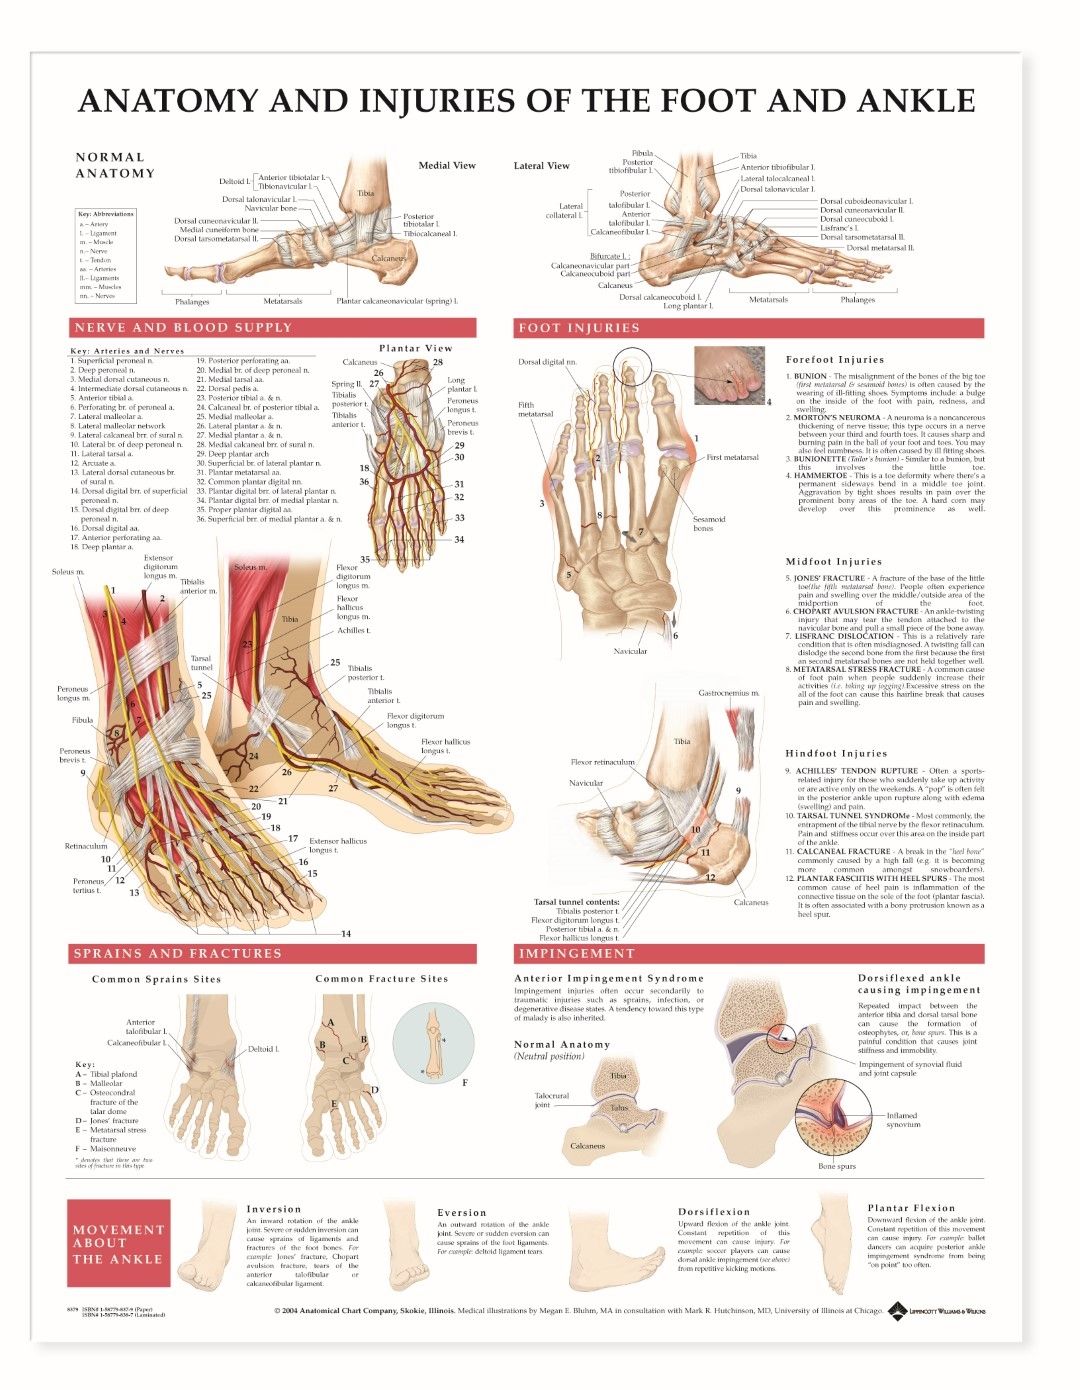 BODYLINE ANATOMY INJURIES OF THE FOOT AND ANKLE CHART photo